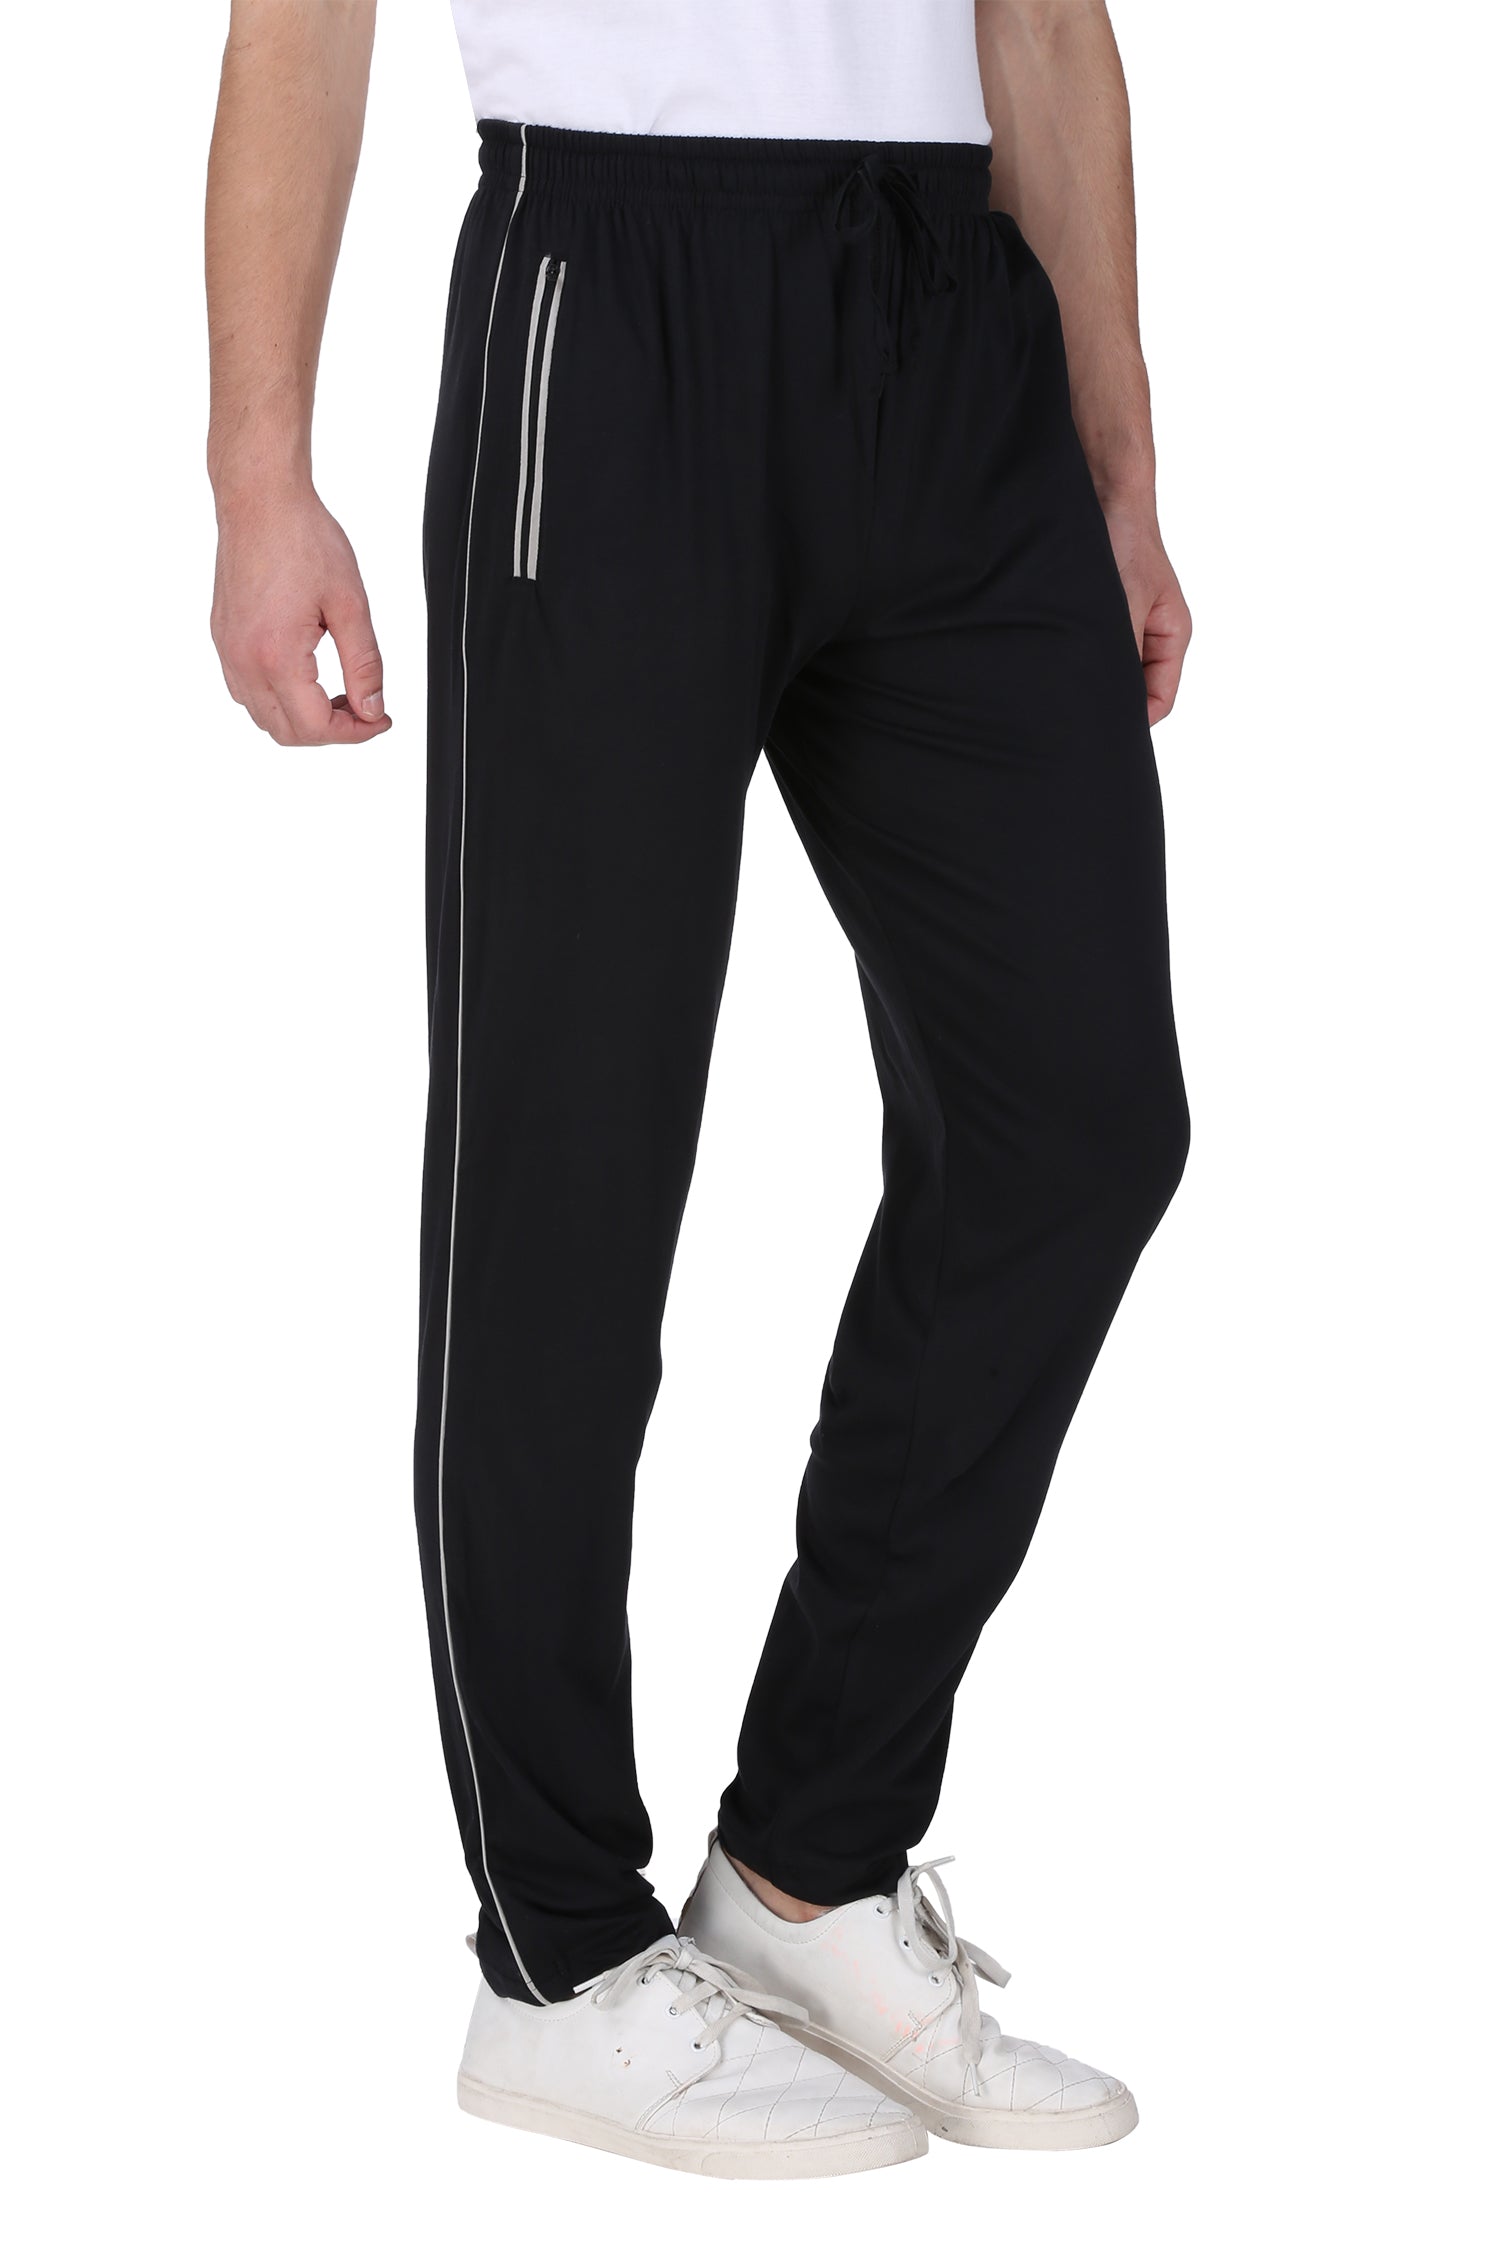 Mens Cotton TRACK PANTS  BLACK  size from M to 9XL  Neo Garments